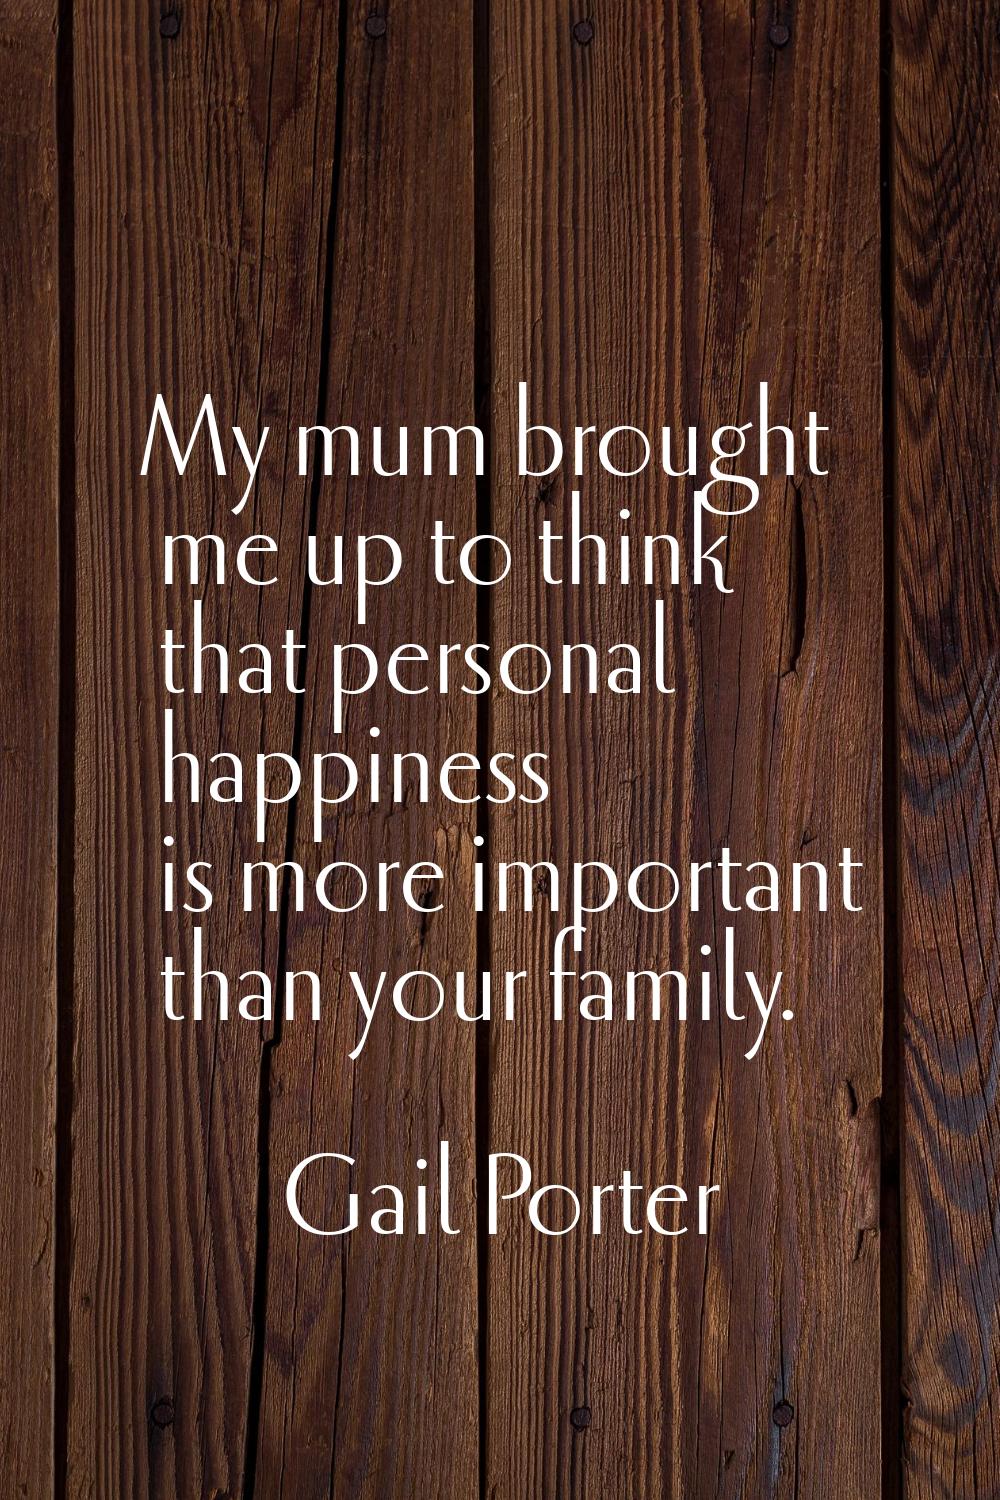 My mum brought me up to think that personal happiness is more important than your family.